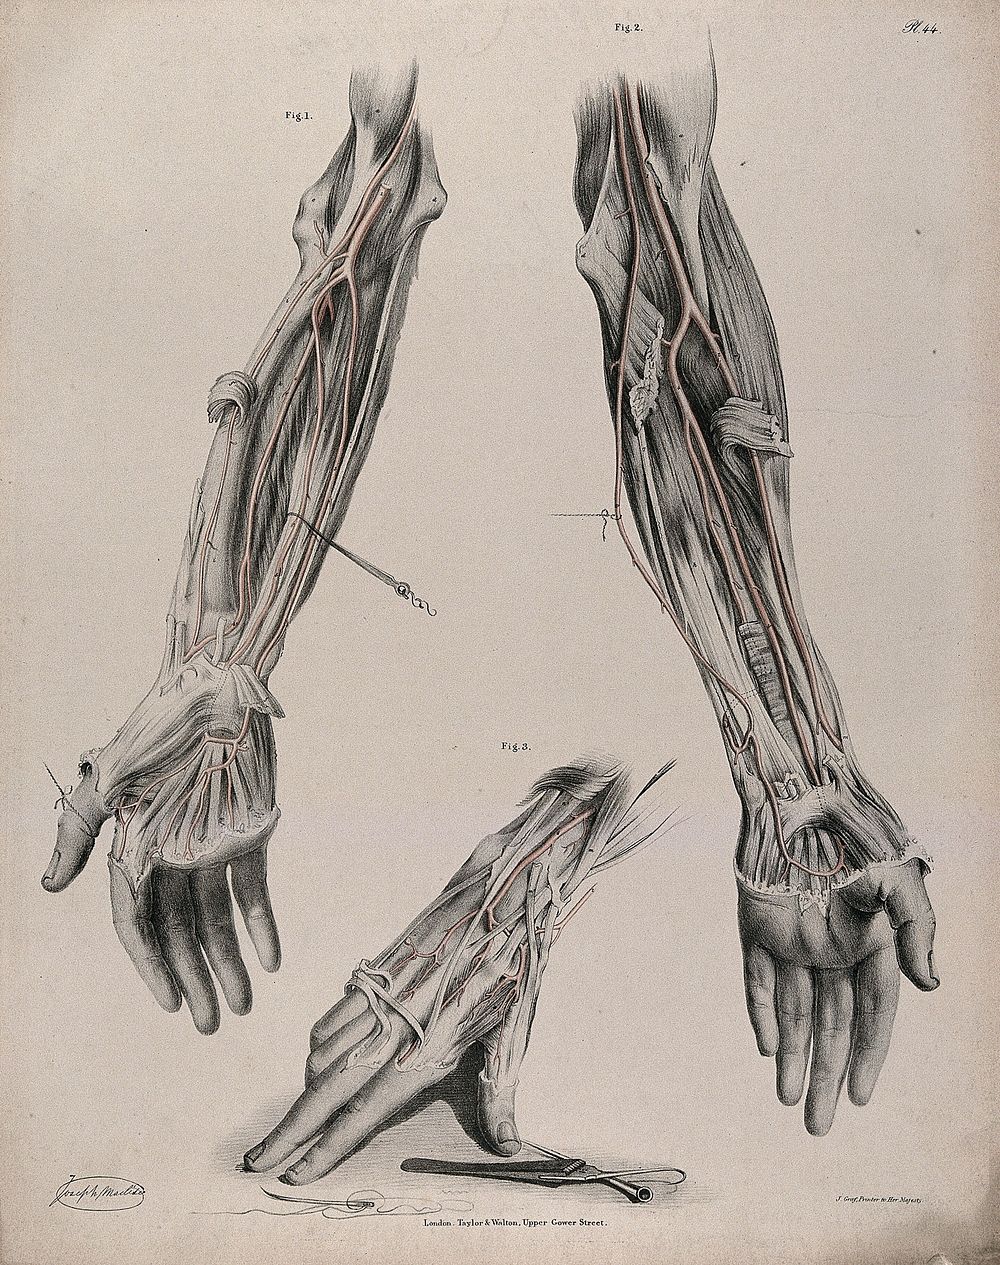 The circulatory system: dissections of the arm and hand, with the arteries indicated in red and surgical instruments shown…